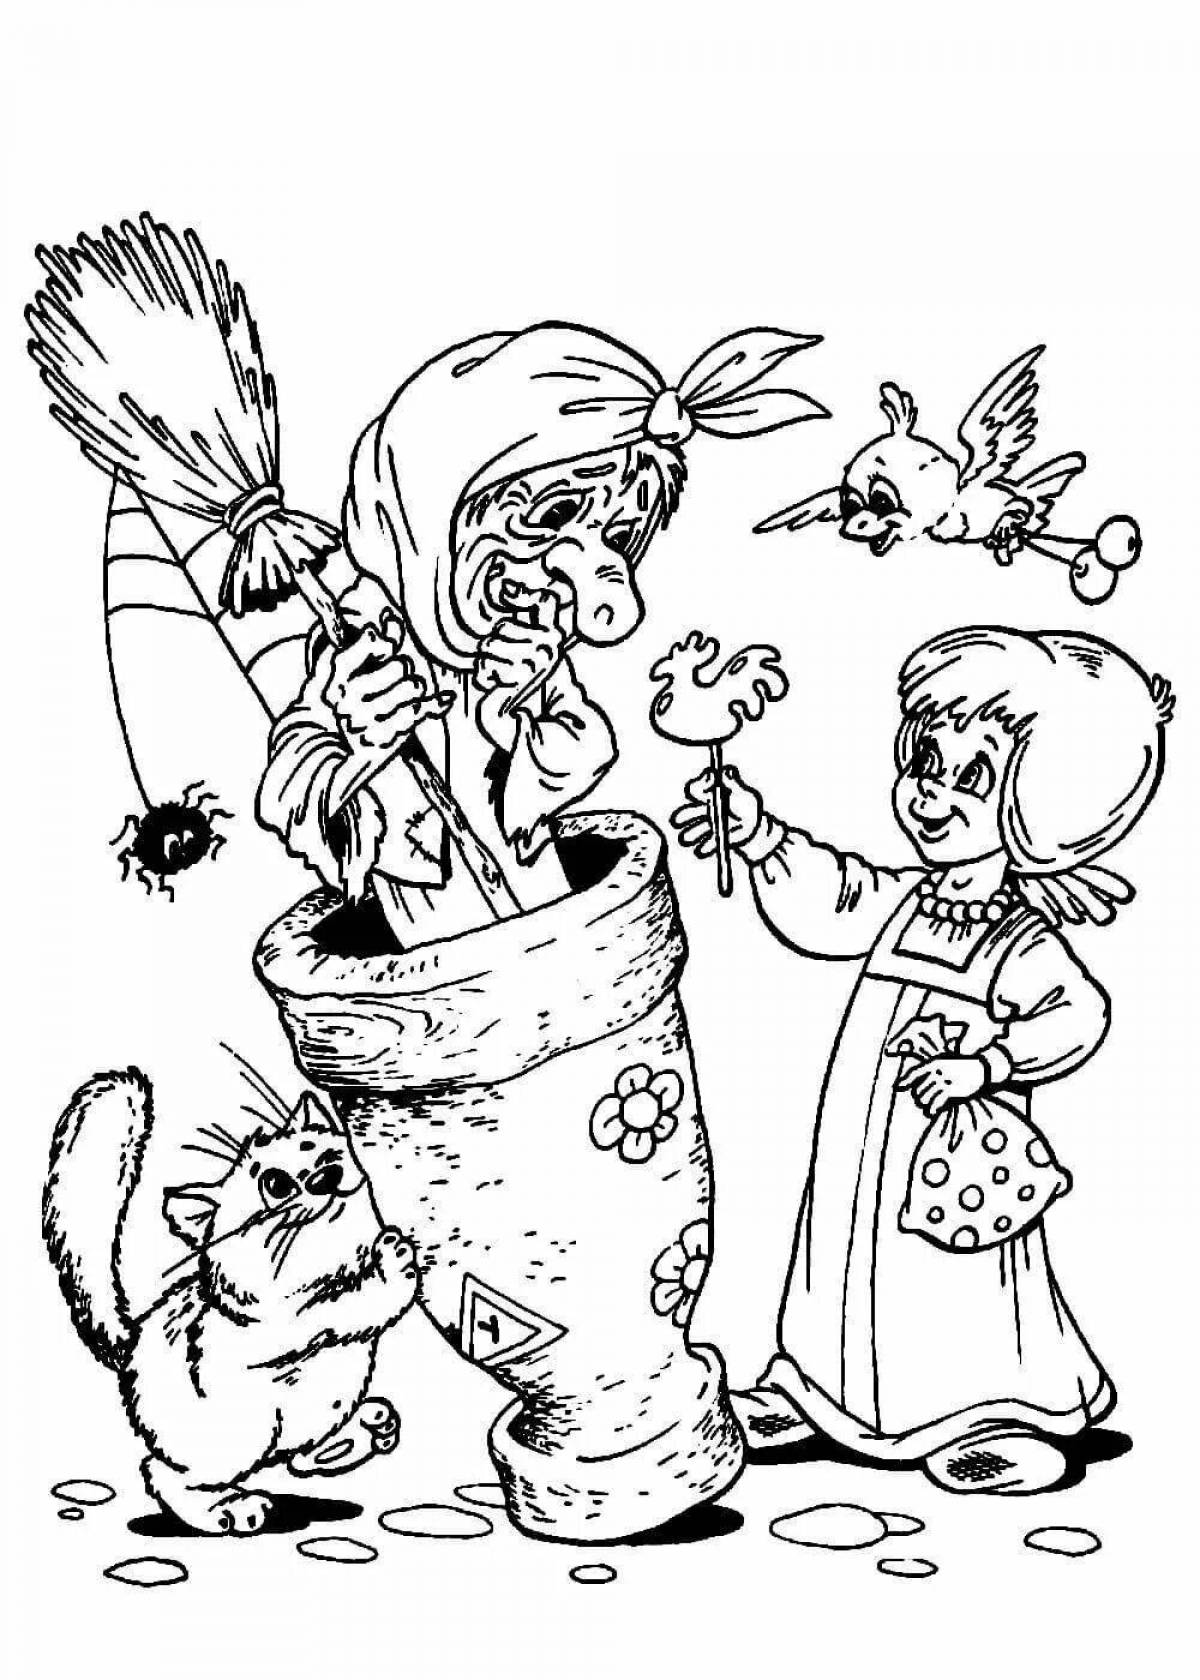 Fancy Baba Yaga coloring pages for kids